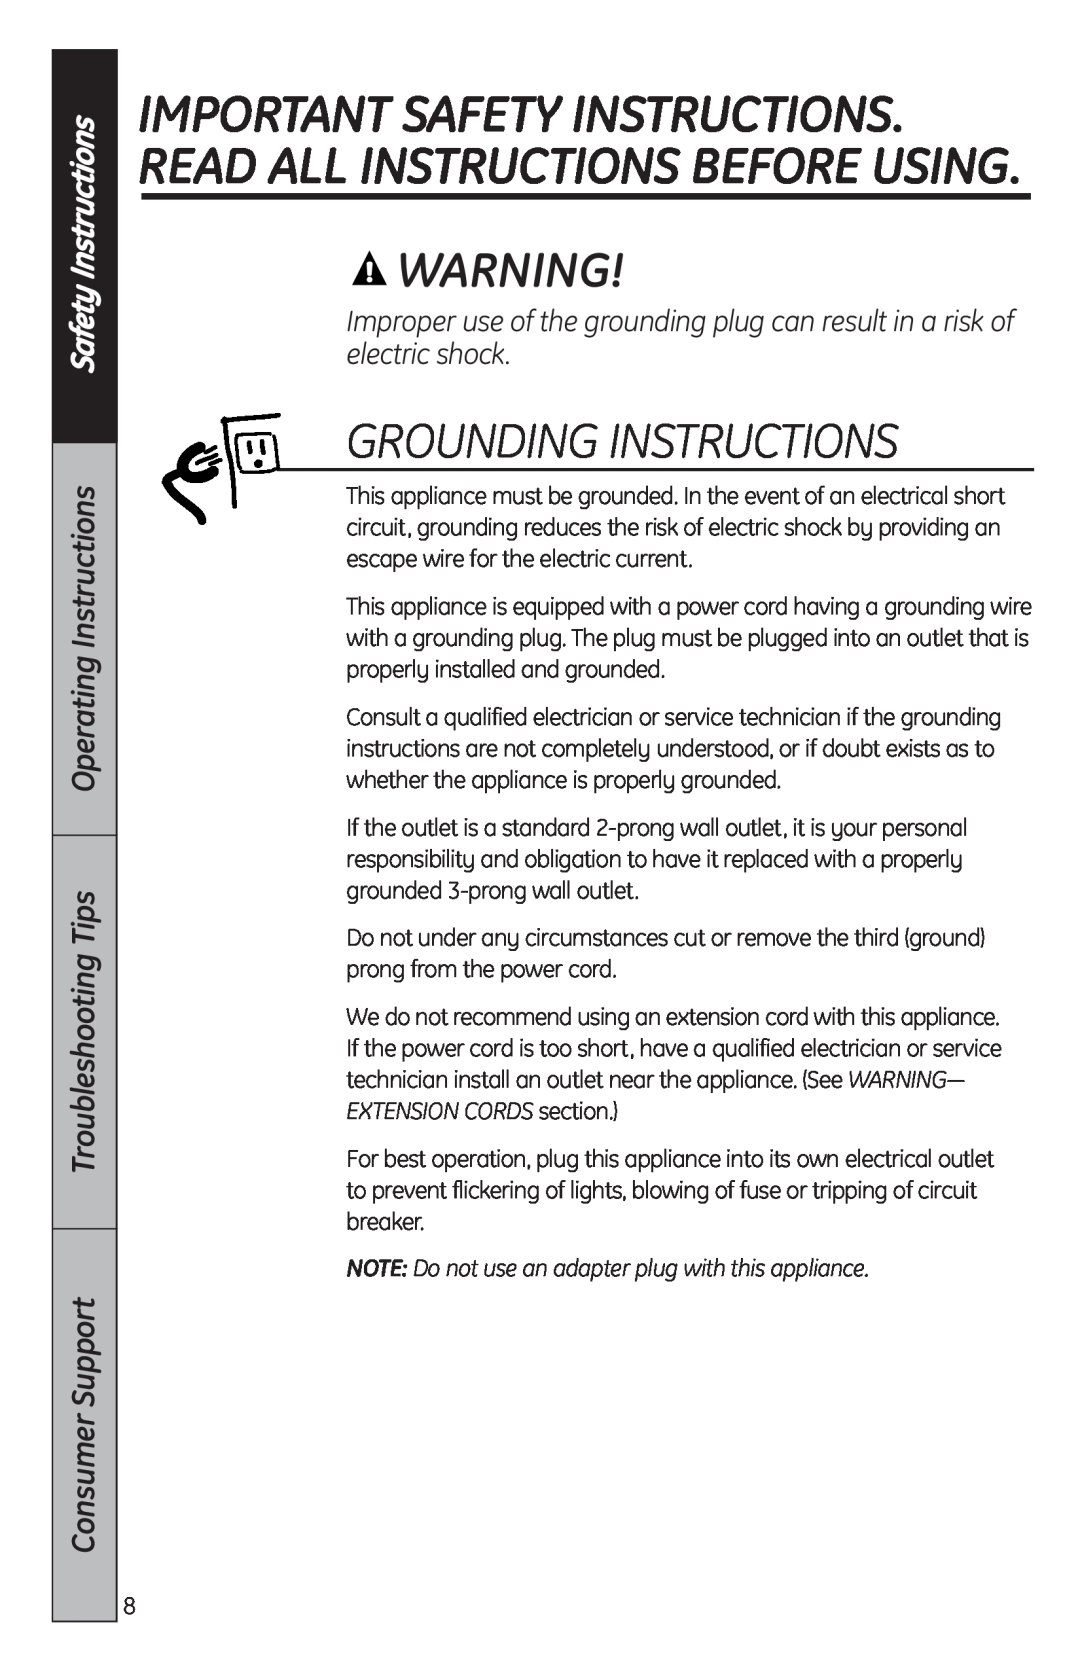 GE MFL38268203 Grounding Instructions, Safety Instructions, Troubleshooting Tips Operating Instructions, Consumer Support 